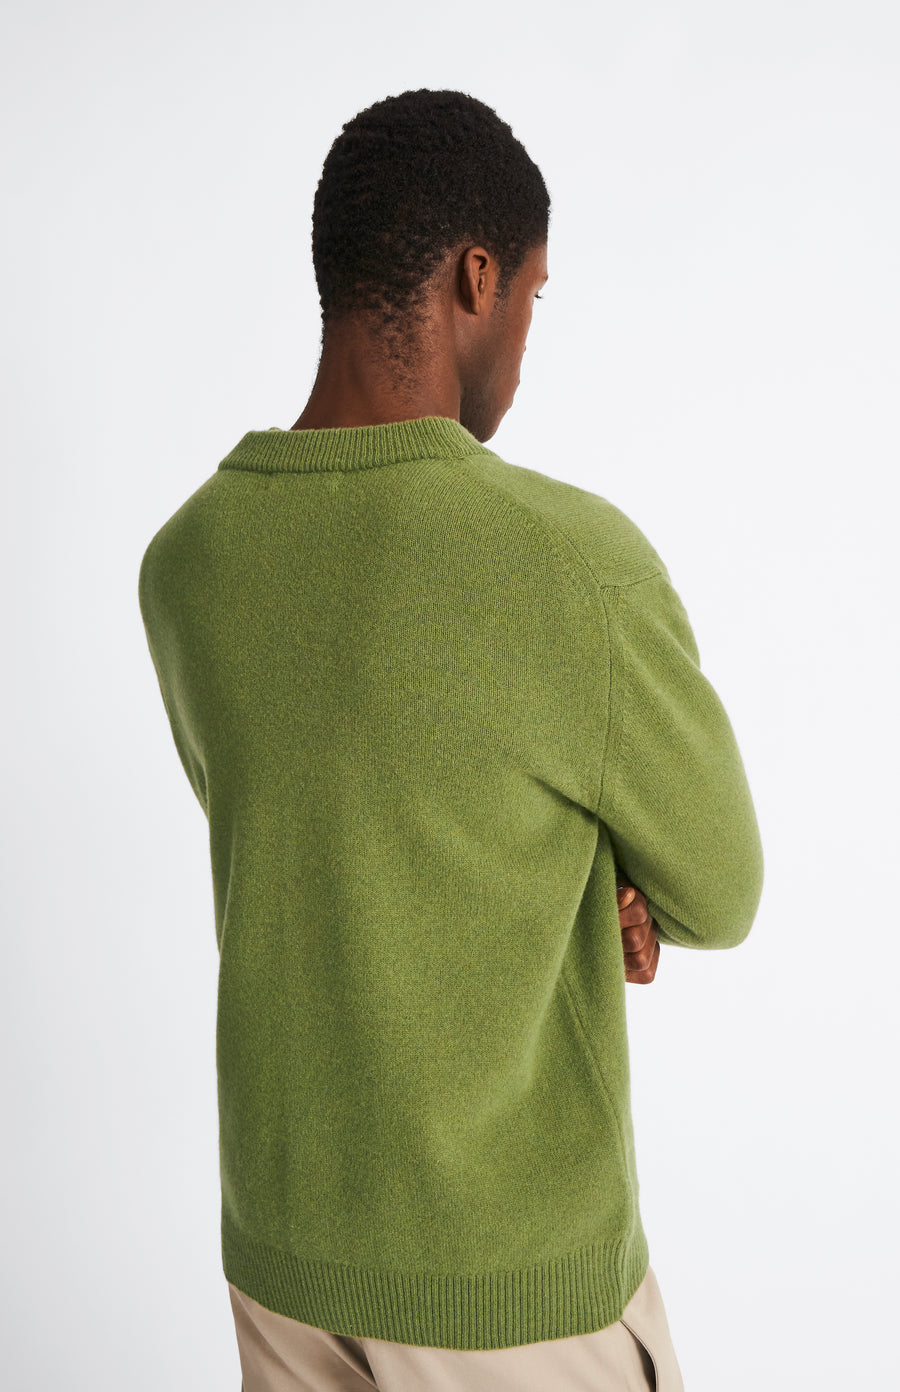 Pringle Men's lambswool V Neck Cardigan in Mineral Green & Mustard Sand rear view